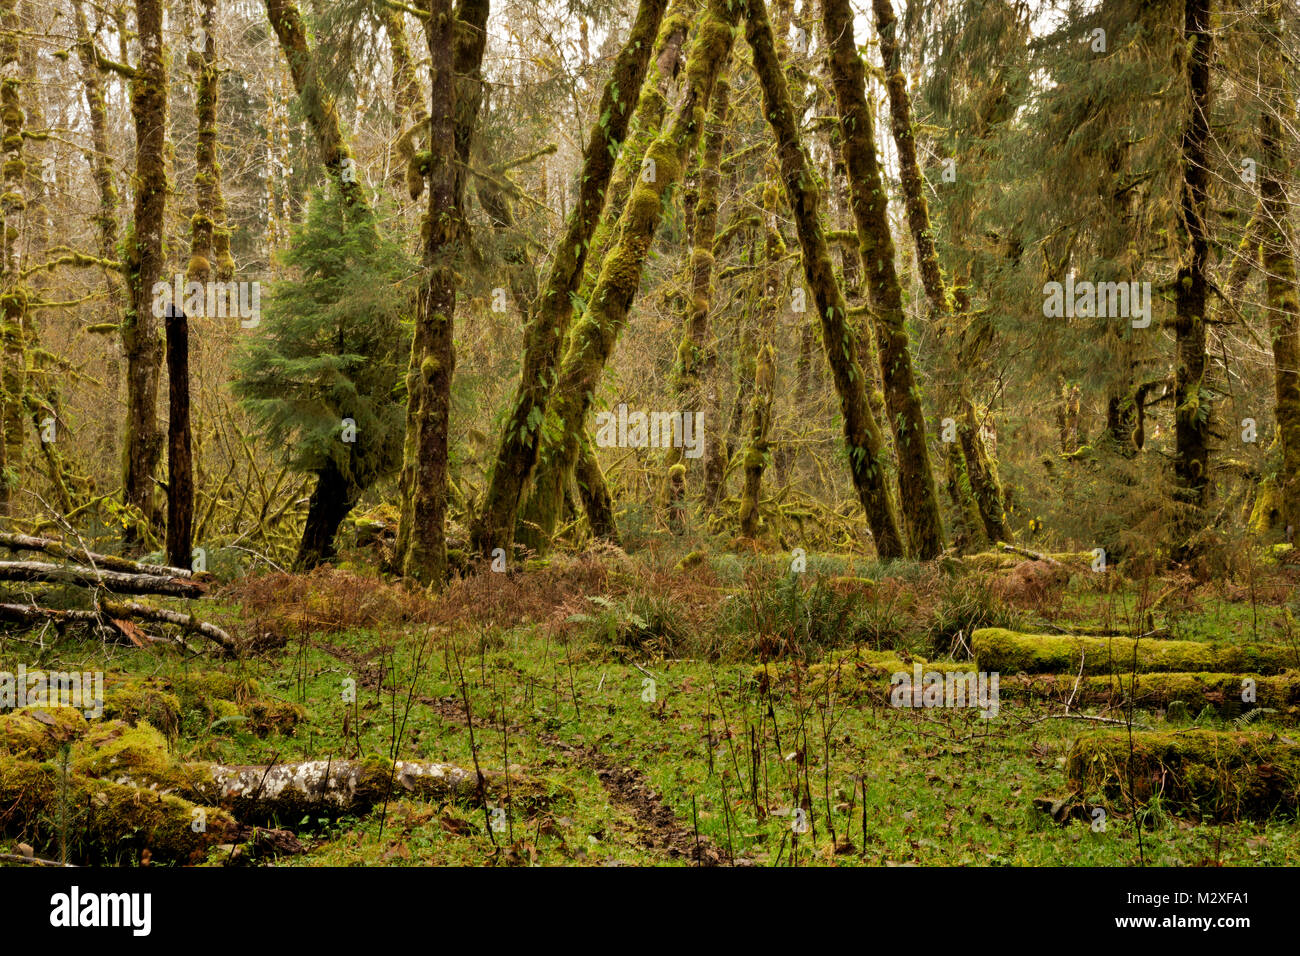 WA13286-00...WASHINGTON - Moss covered trees along Sams River Trail in the Queets Rain Forest of Olympic National Park. Stock Photo